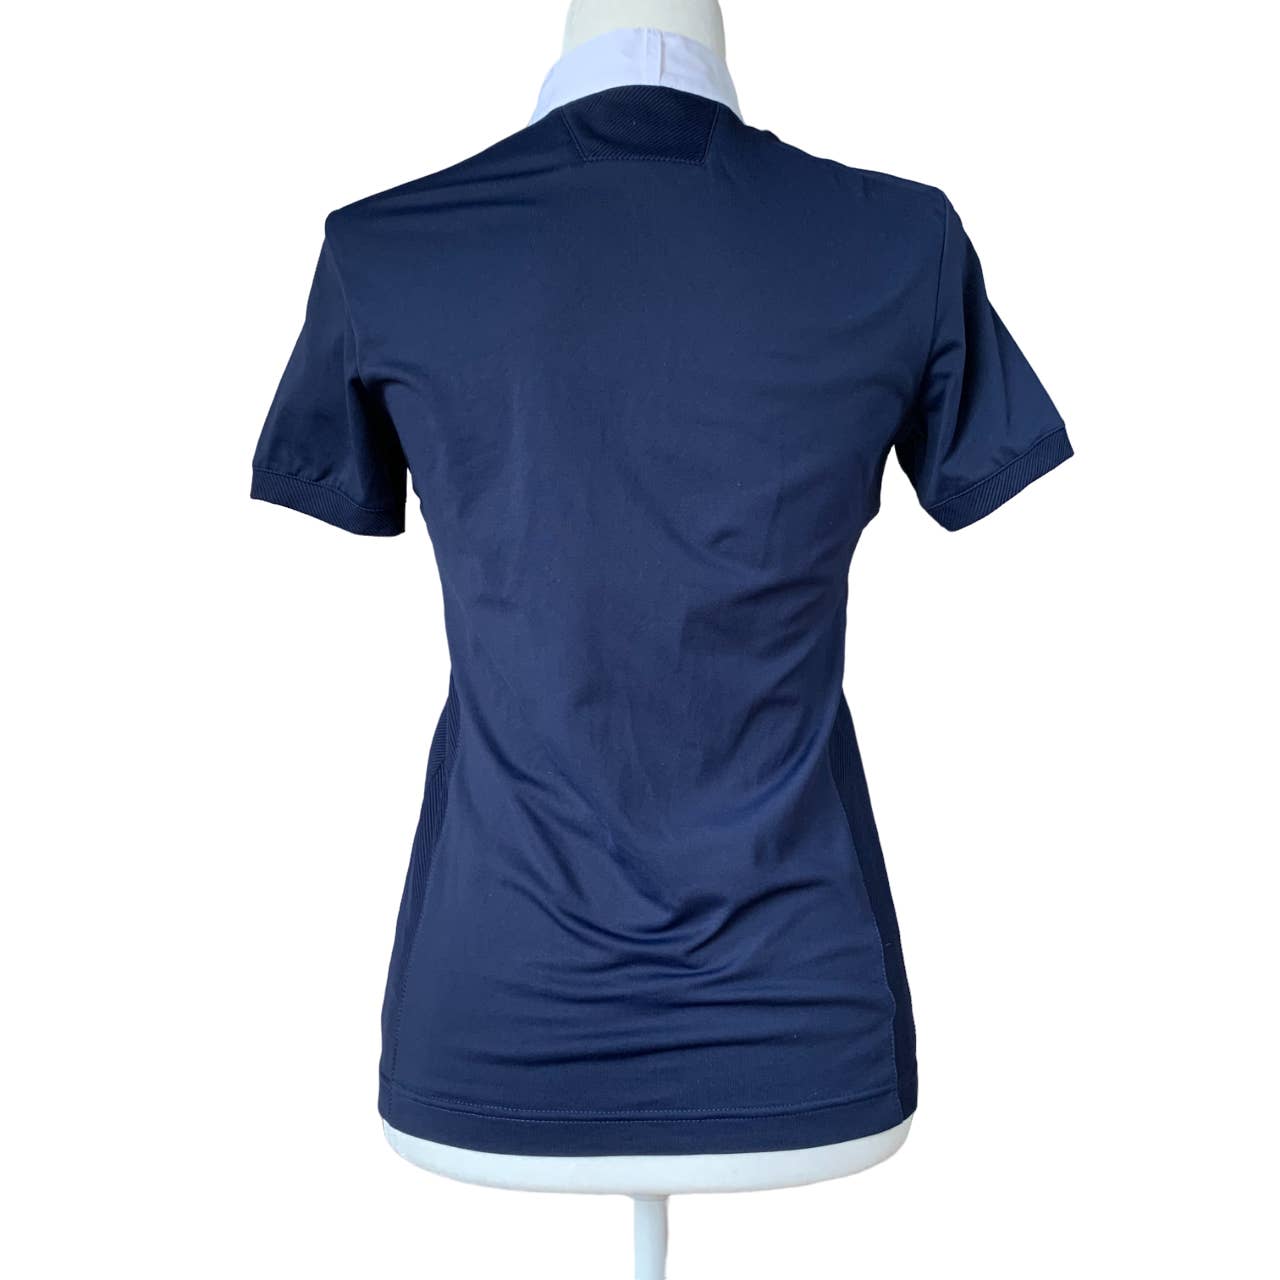 Animo Competition Show Shirt in Navy - Woman's I-42 (Medium)